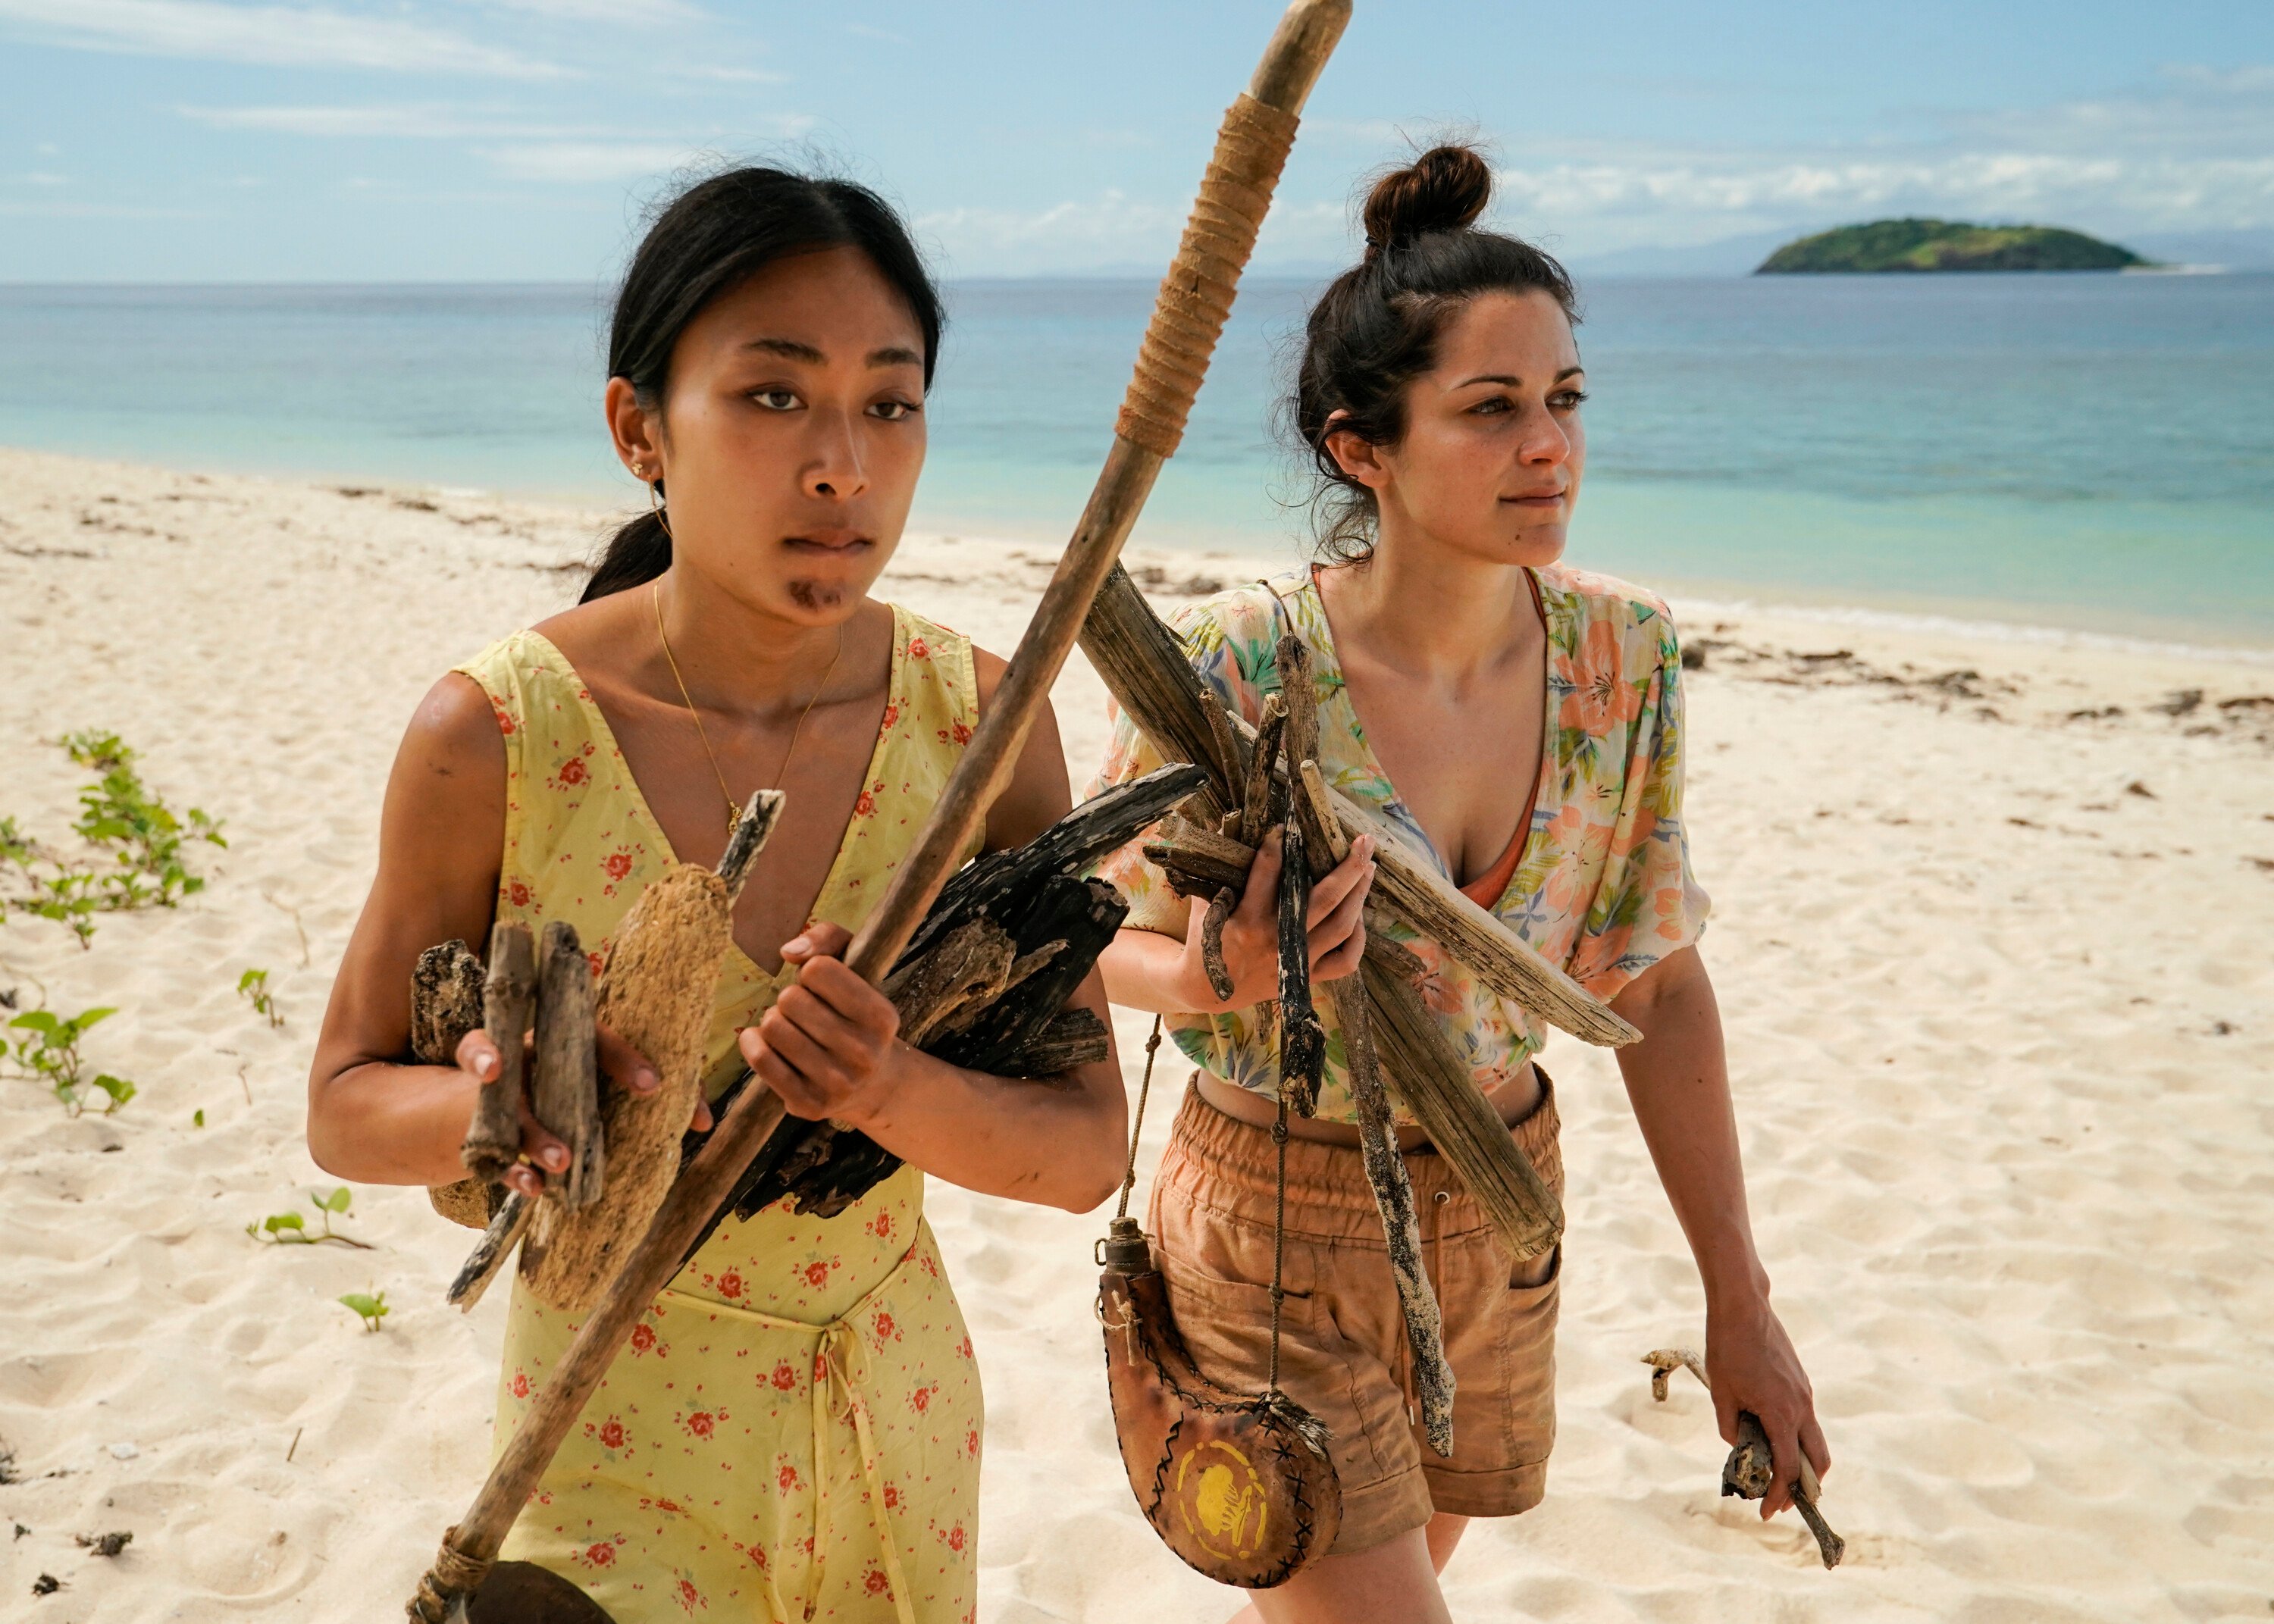 Elie Scott, who, according to 'Survivor' Season 43 spoilers, may win, collects firewood with tribemate Jeanine Zheng on the beach. Jeanine wears a light yellow romper with red flowers. Elie wears a pink, blue, green, and white floral shirt and muted orange shorts.